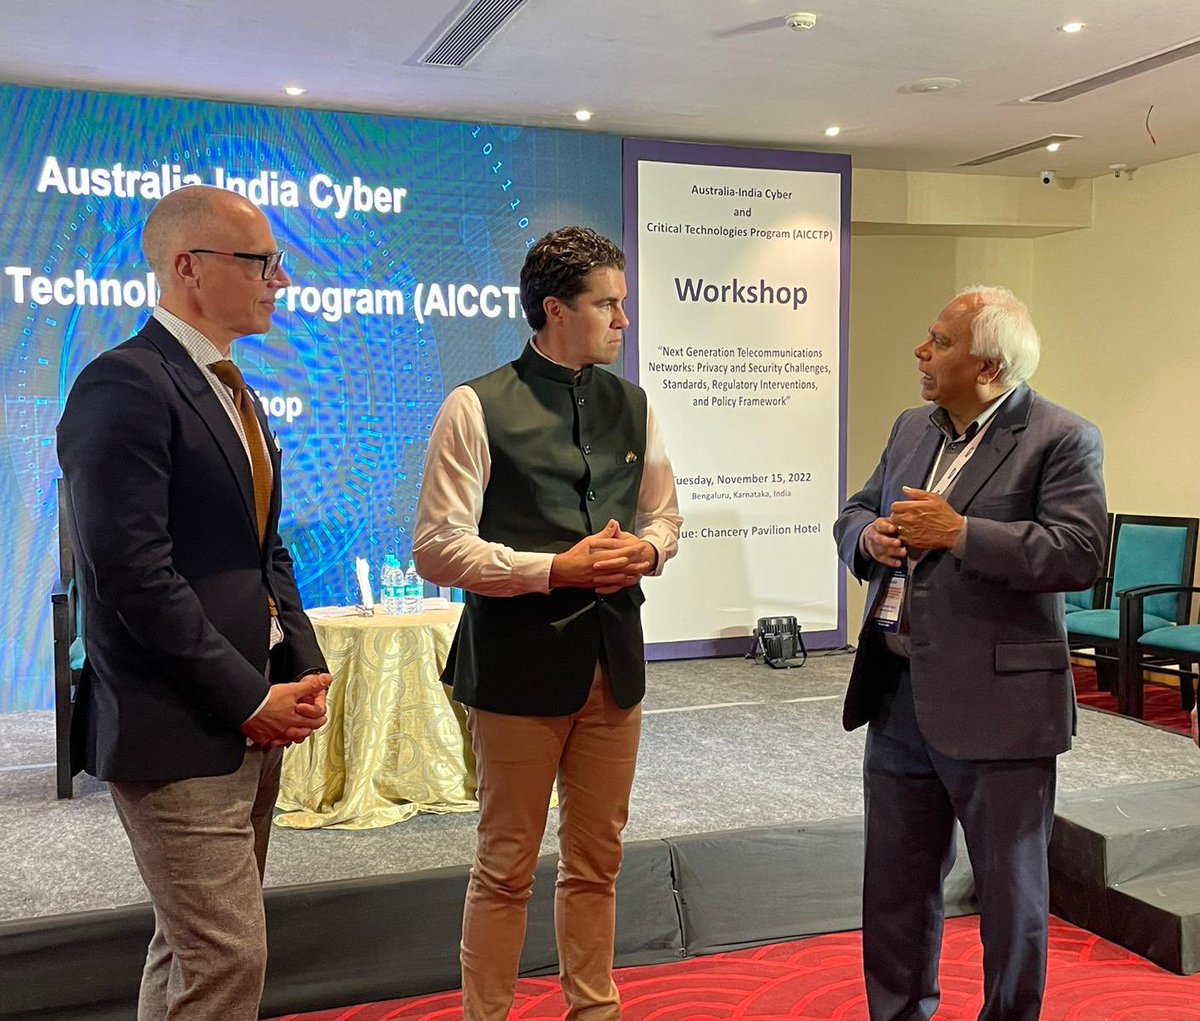 The Australia-India Cyber & Critical Tech Partnership (AICCTP) proudly supports practical 🇦🇺🇮🇳collaboration on shared issues in our region. Honoured to speak at the @Sydney_Uni & @iitmadras workshop in Bengaluru on NextGen Telecommunications Networks alongside @TimWattsMP